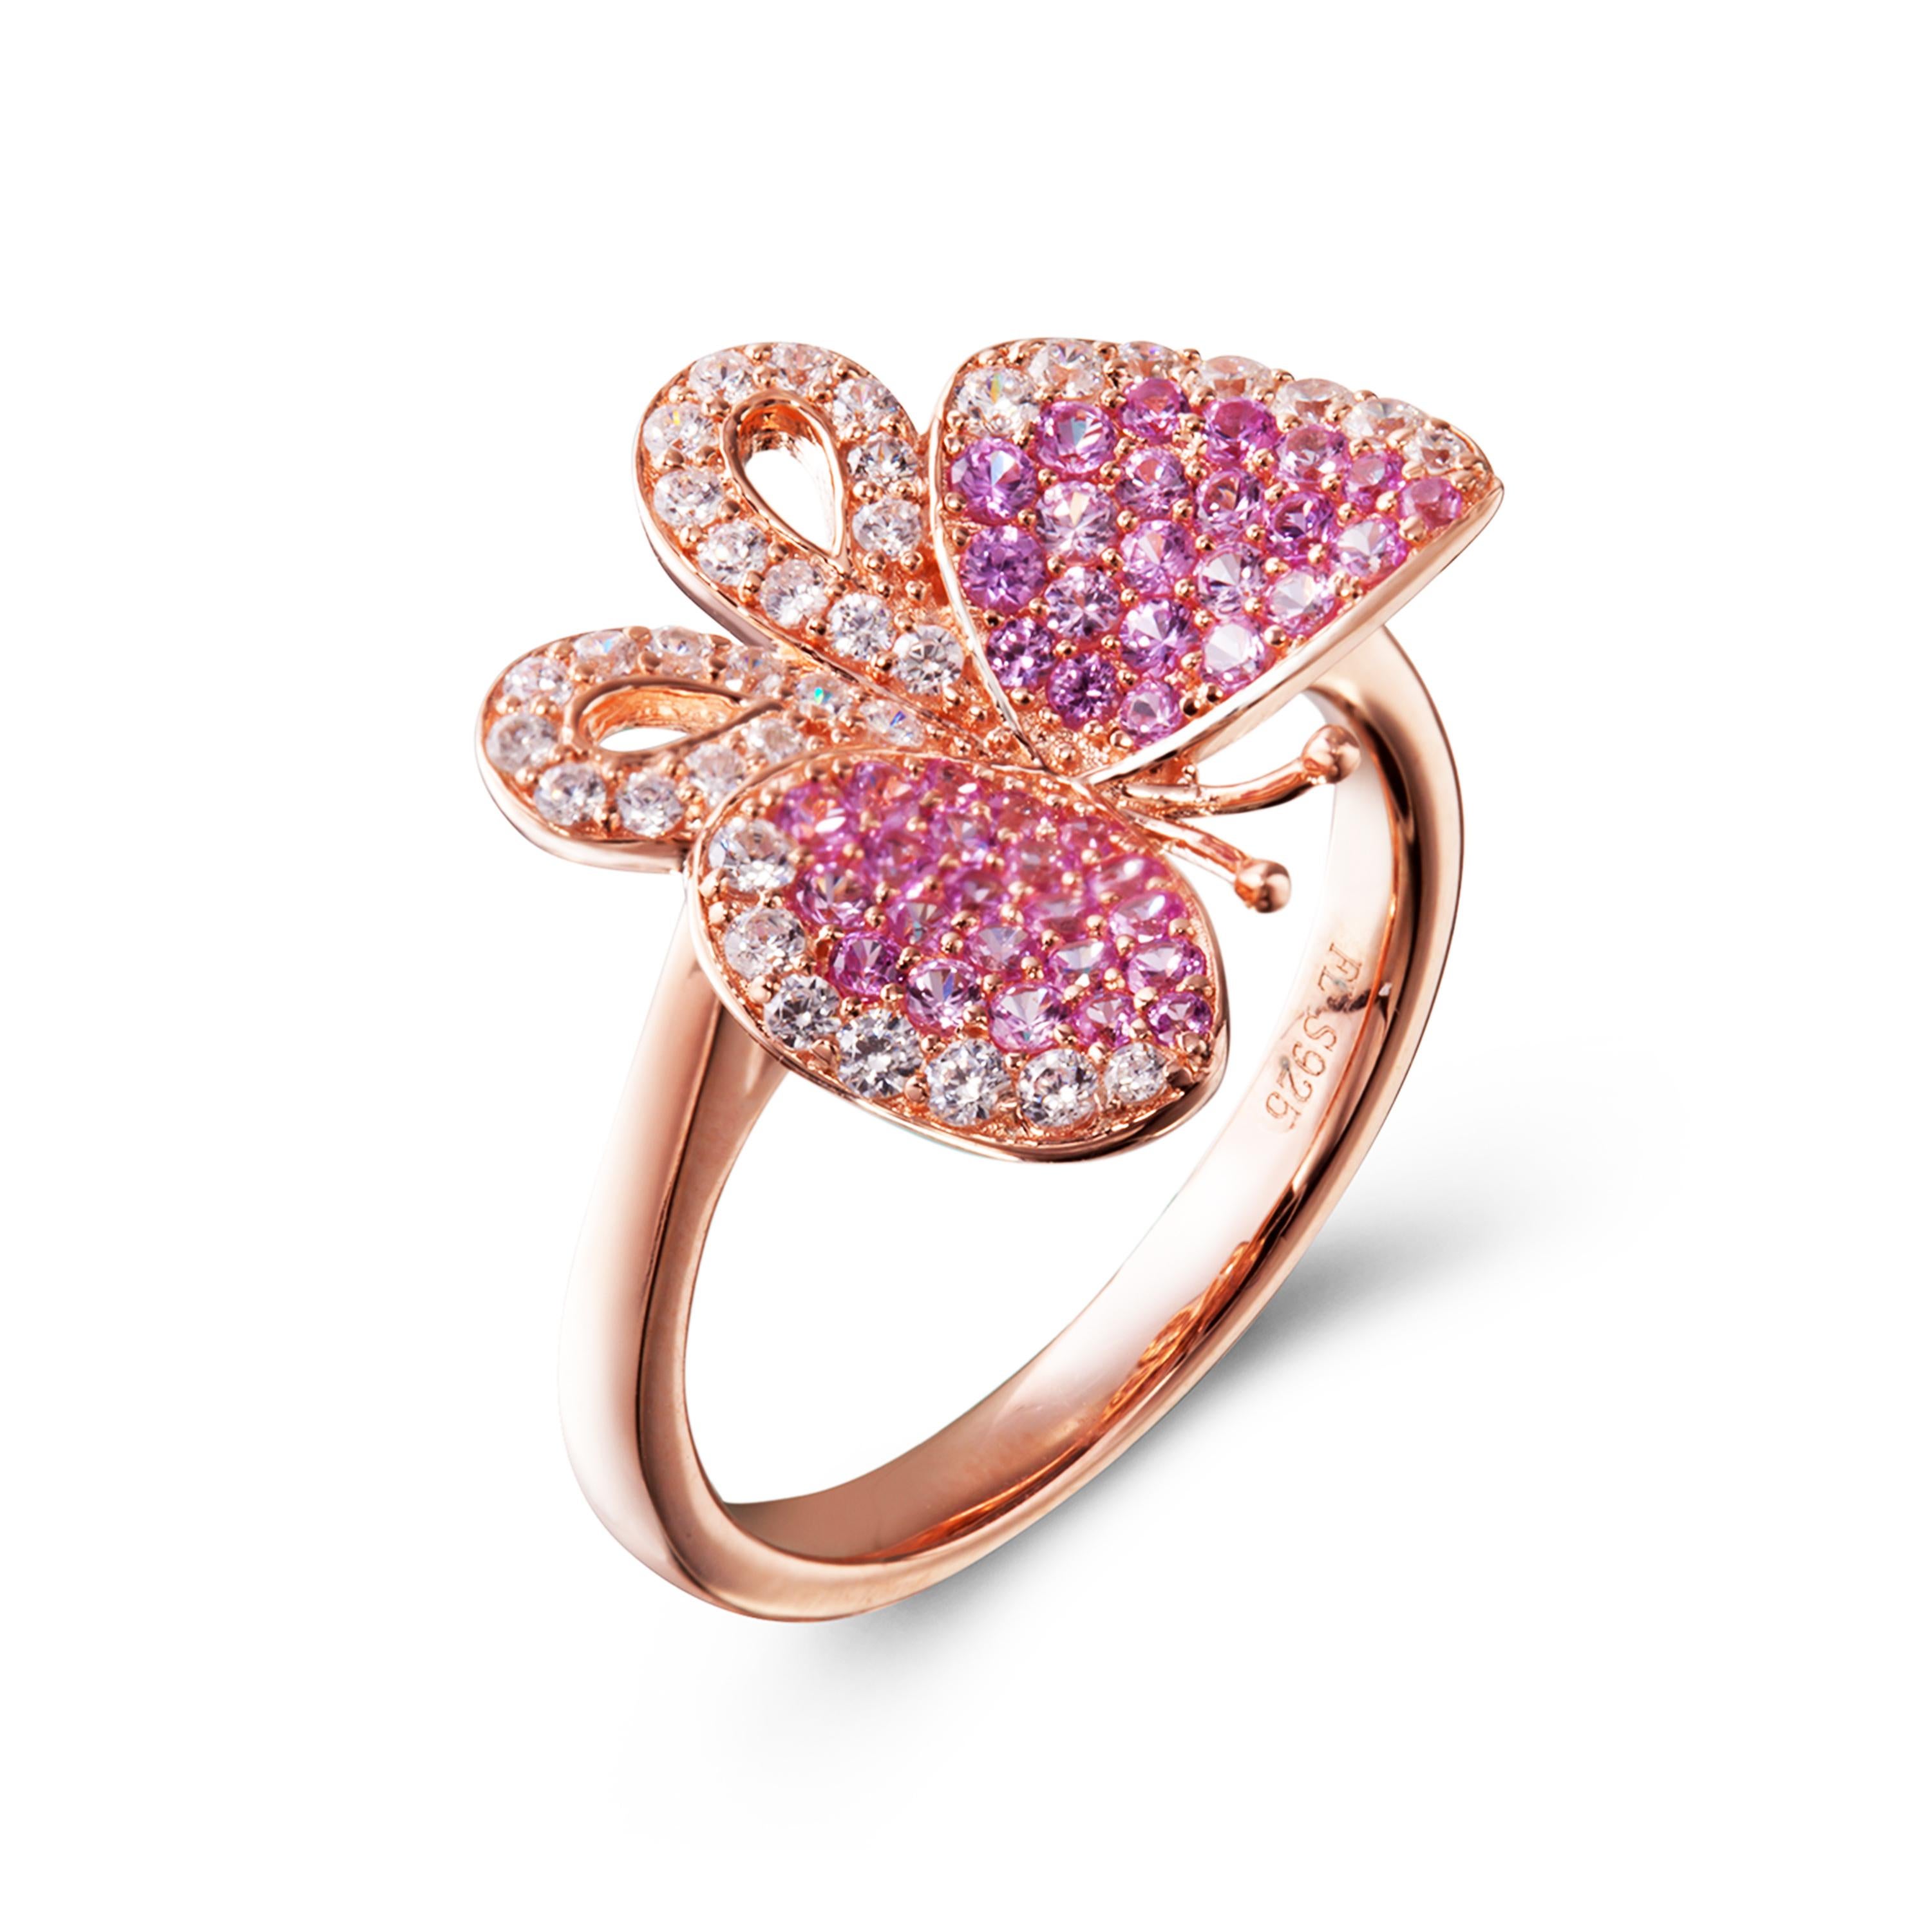 Butterfly captures the feminine essence and the carefree, joyful movement of these intricate and delicate creatures in sparkling weightless jewels. Butterfly ring with wings bejewelled in ruby pink and white cubic zirconia set in rose gold plate on